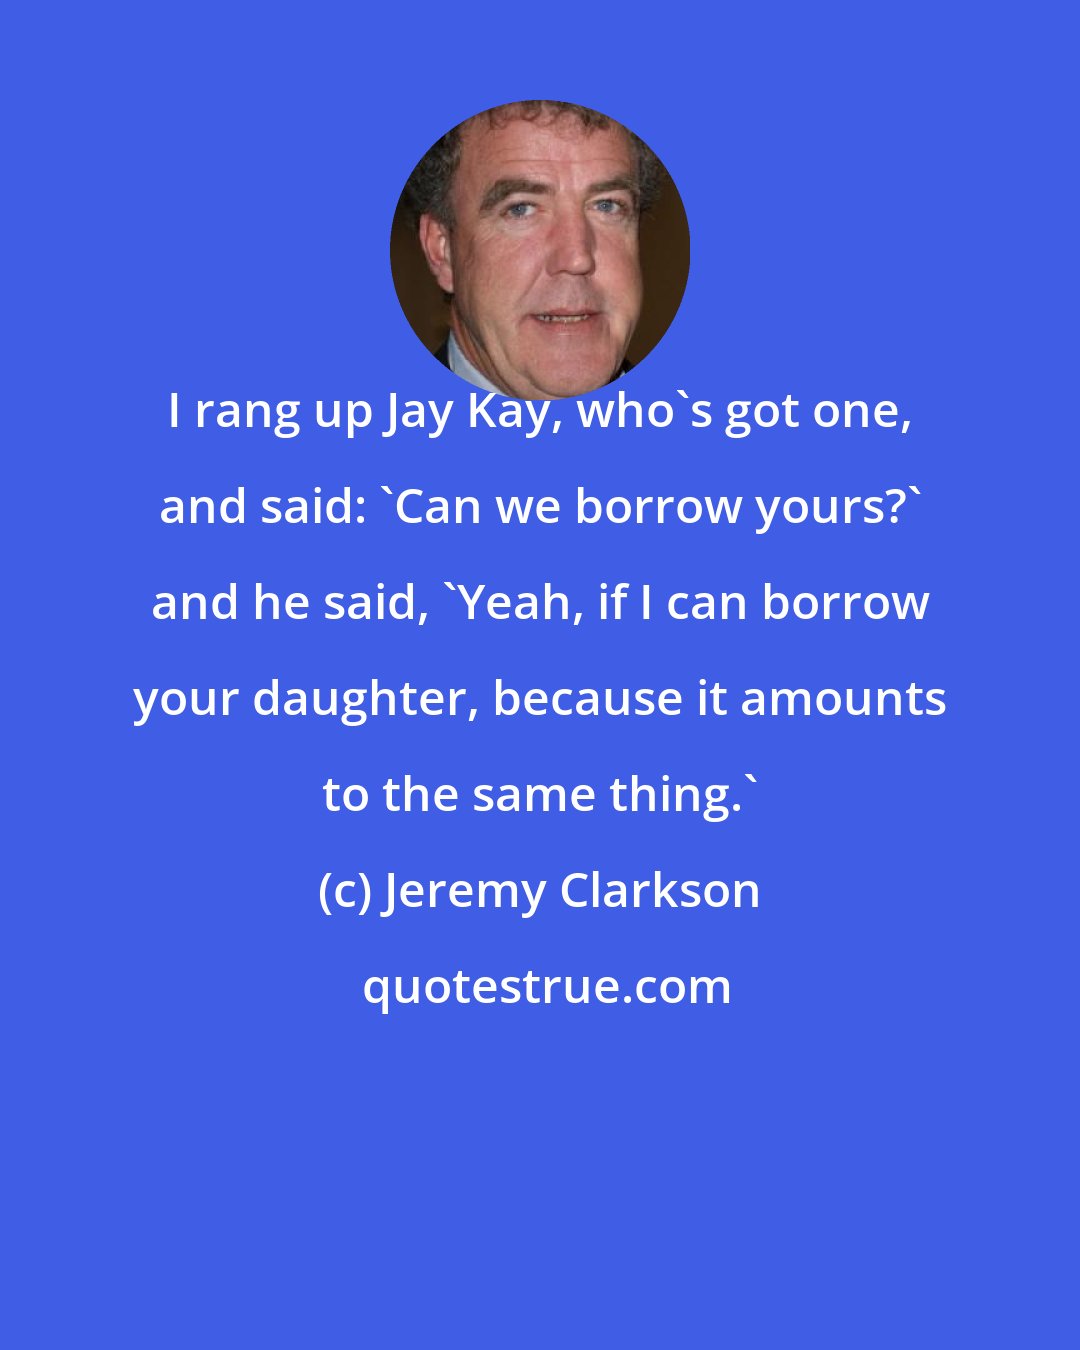 Jeremy Clarkson: I rang up Jay Kay, who's got one, and said: 'Can we borrow yours?' and he said, 'Yeah, if I can borrow your daughter, because it amounts to the same thing.'